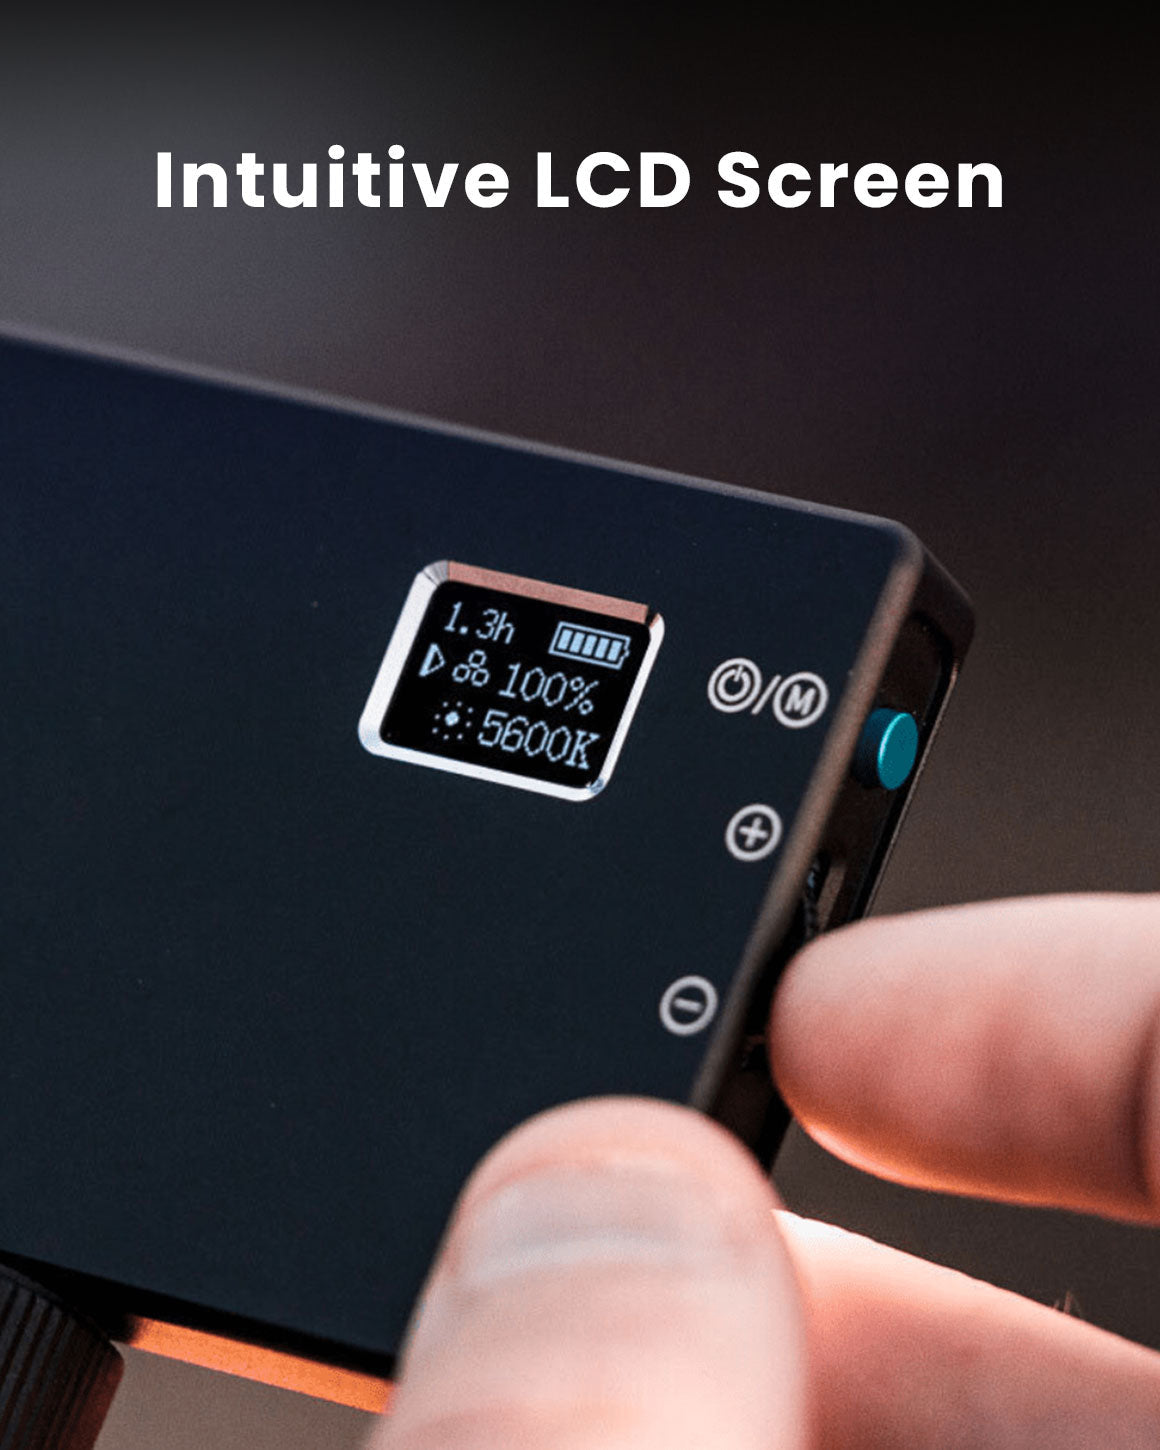 Intuitive LCD Screen.  Backside of credit-card-sized LED lighting panel showing LCD settings and battery indicator screen.